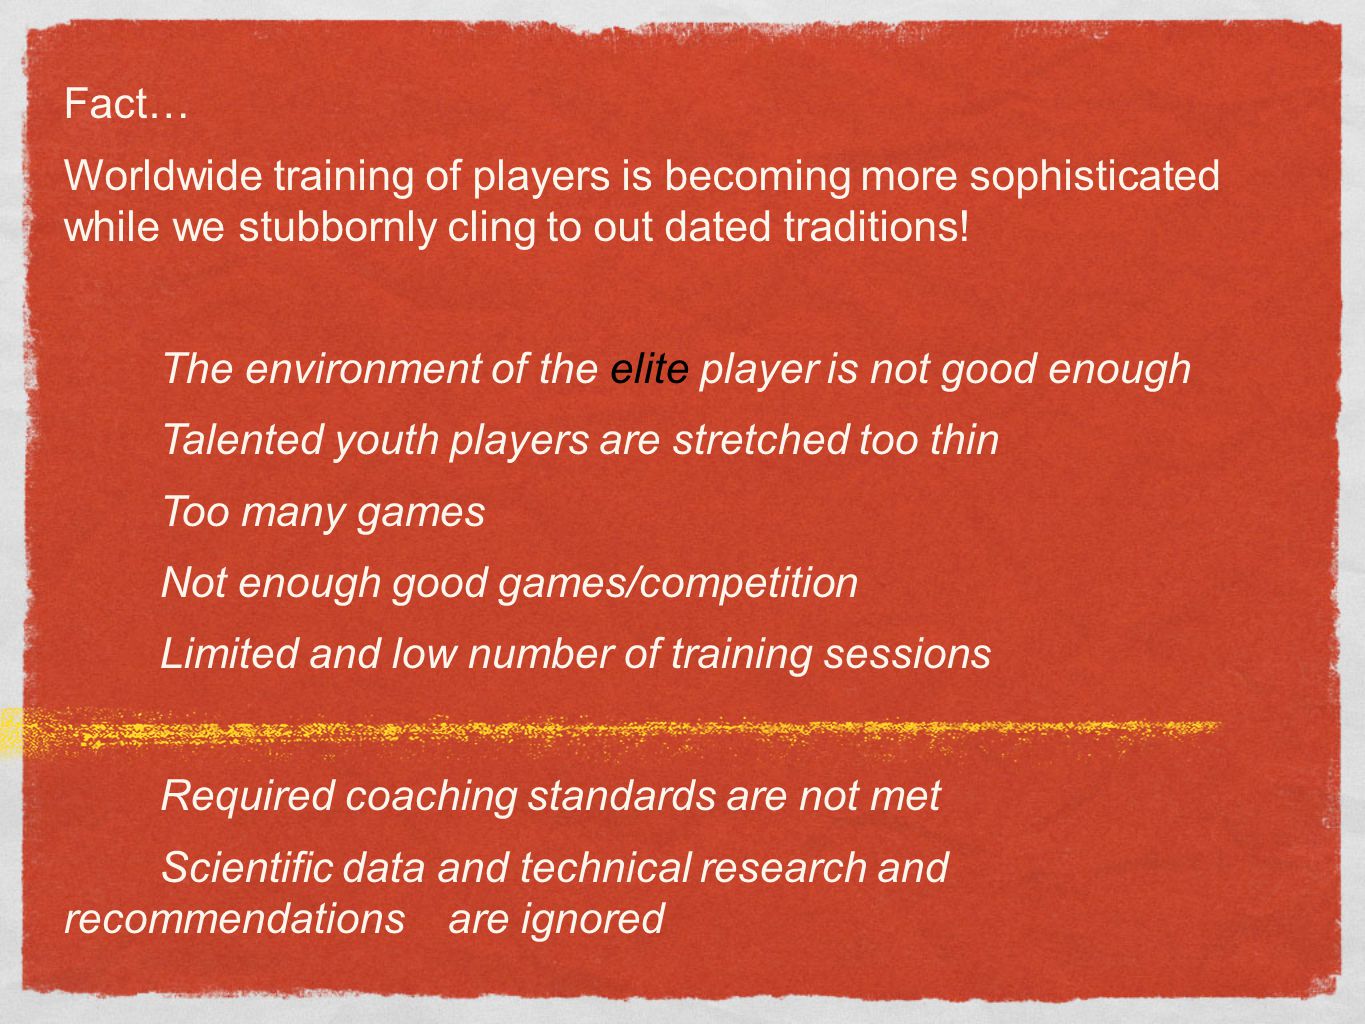 Fact… Worldwide training of players is becoming more sophisticated while we stubbornly cling to out dated traditions!